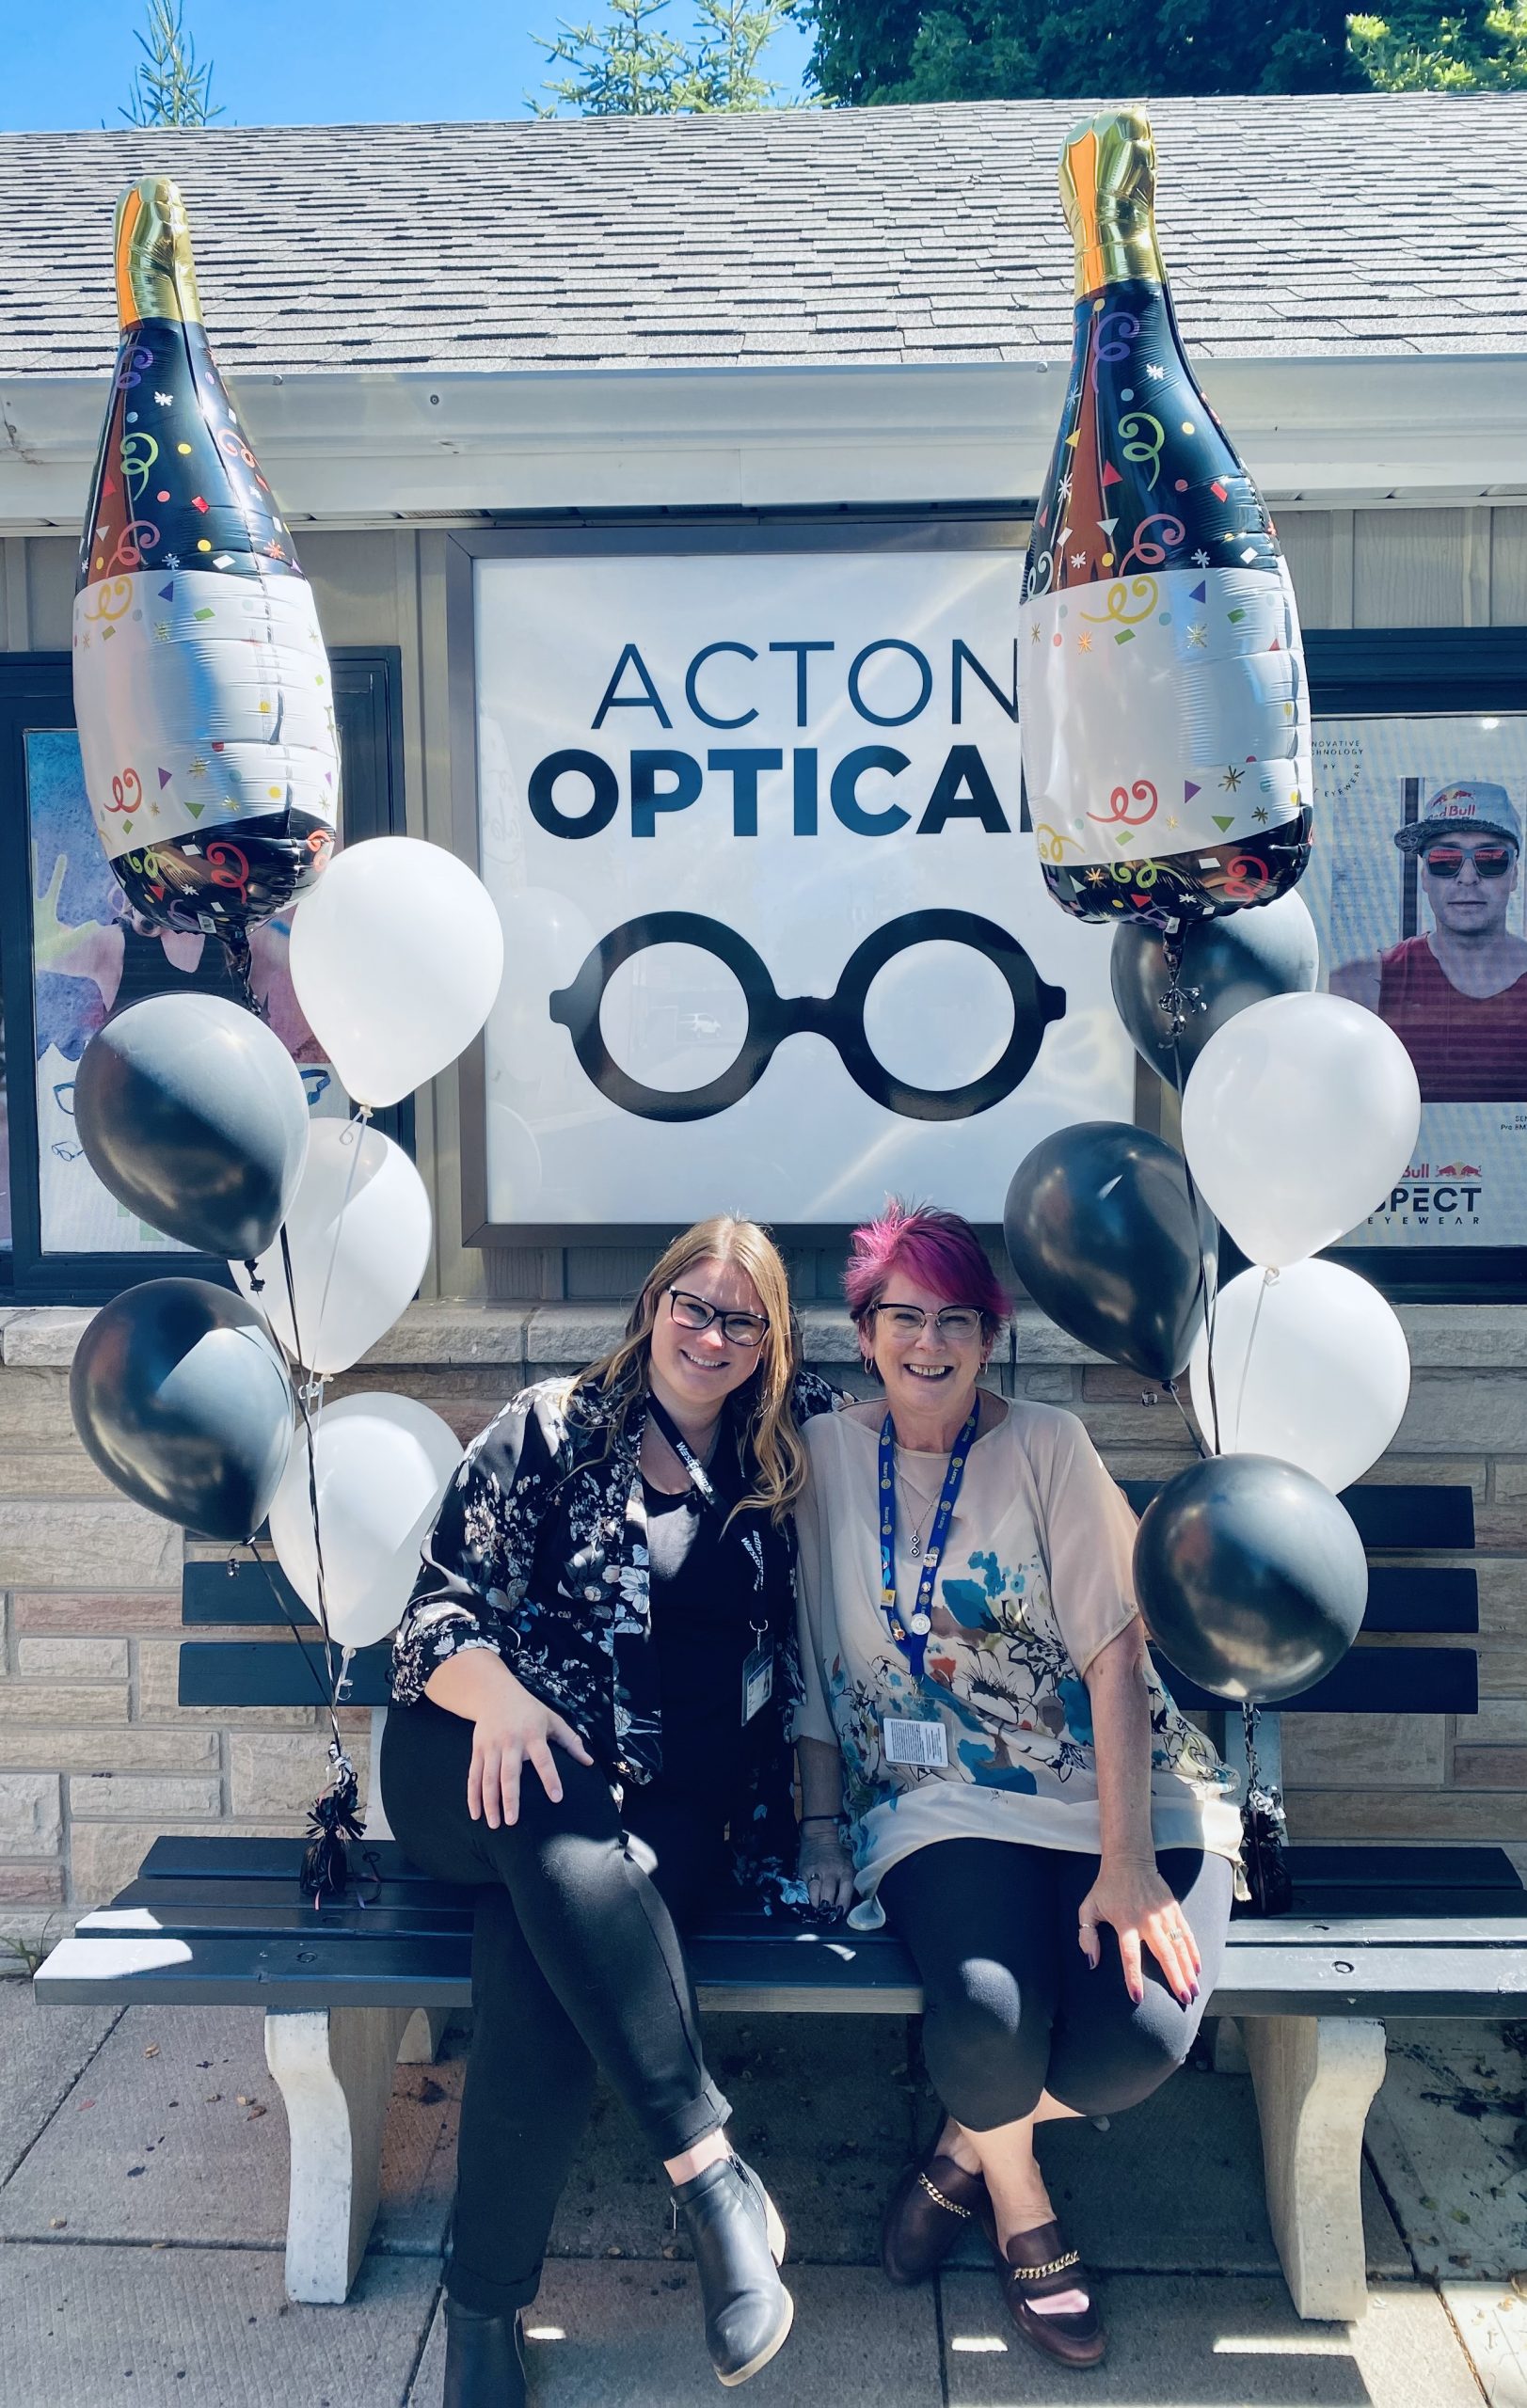 Meet the Business Owner – Acton Optical